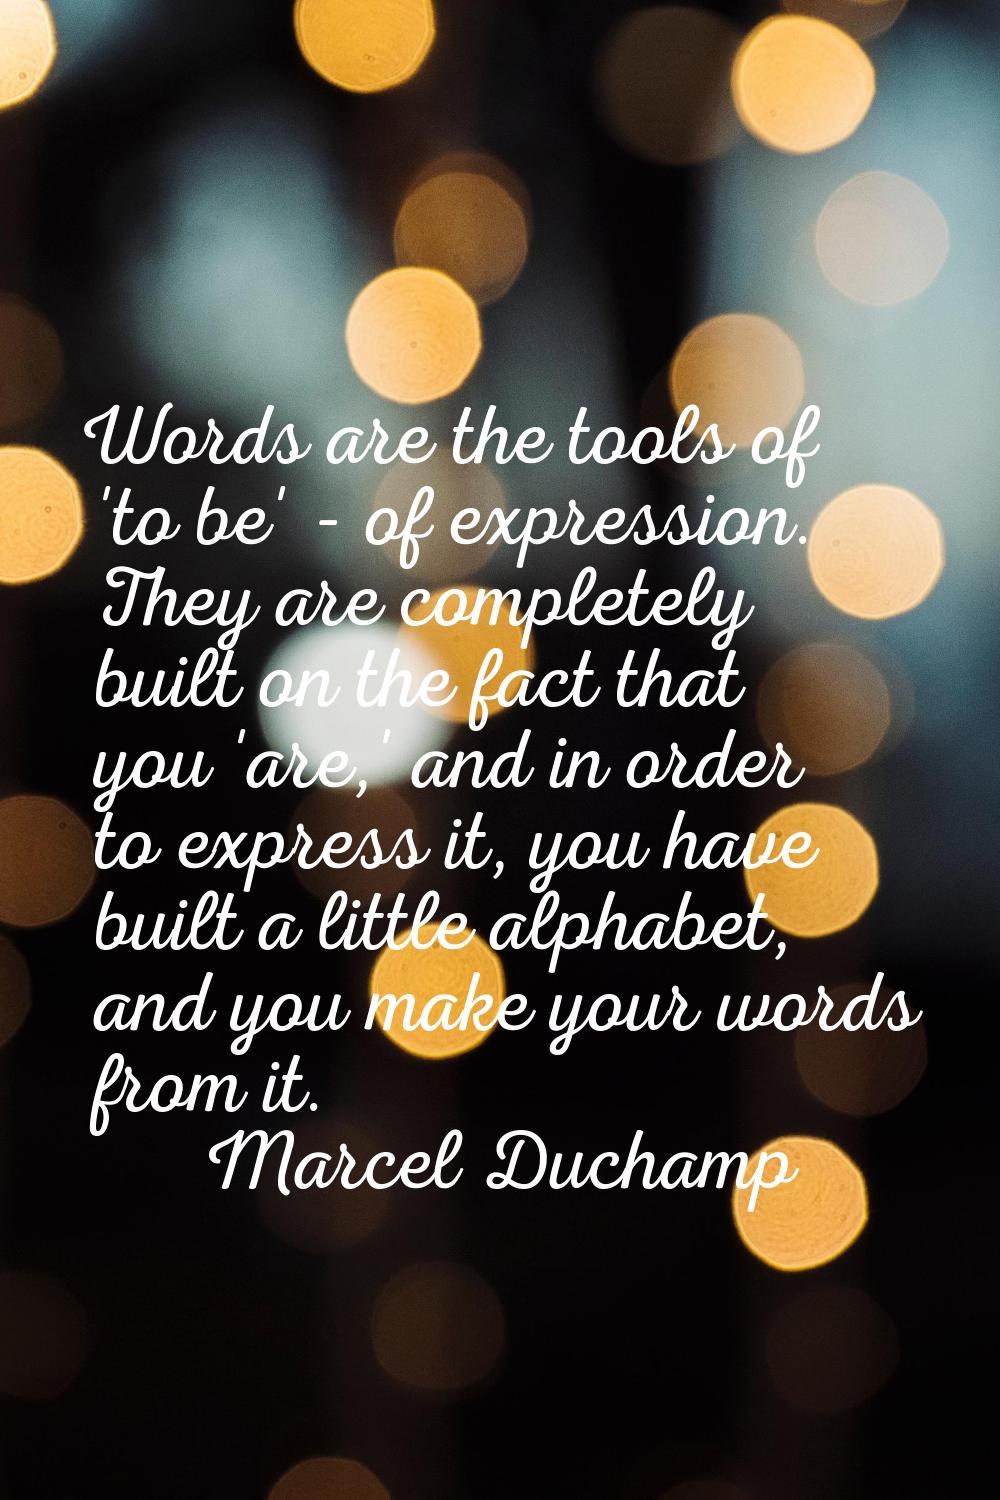 Words are the tools of 'to be' - of expression. They are completely built on the fact that you 'are